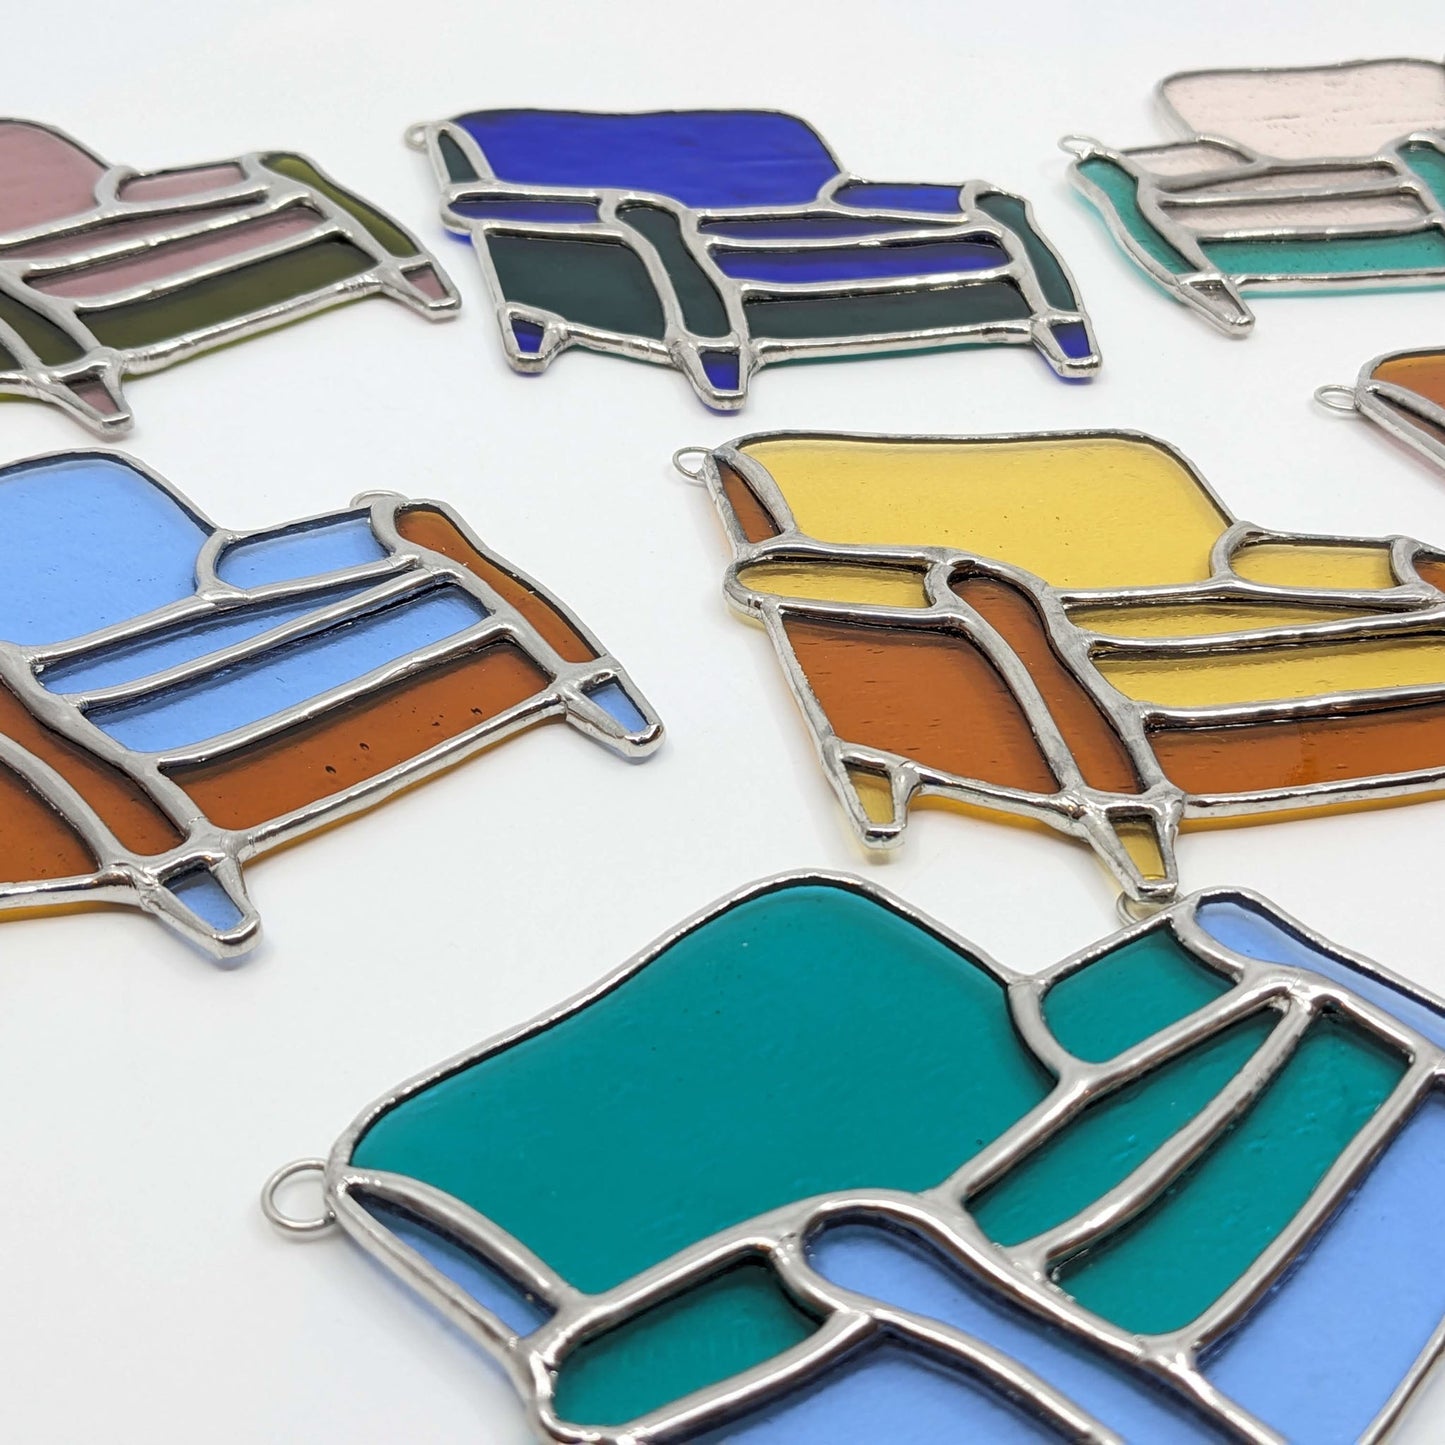 Armchairs- Stained Glass